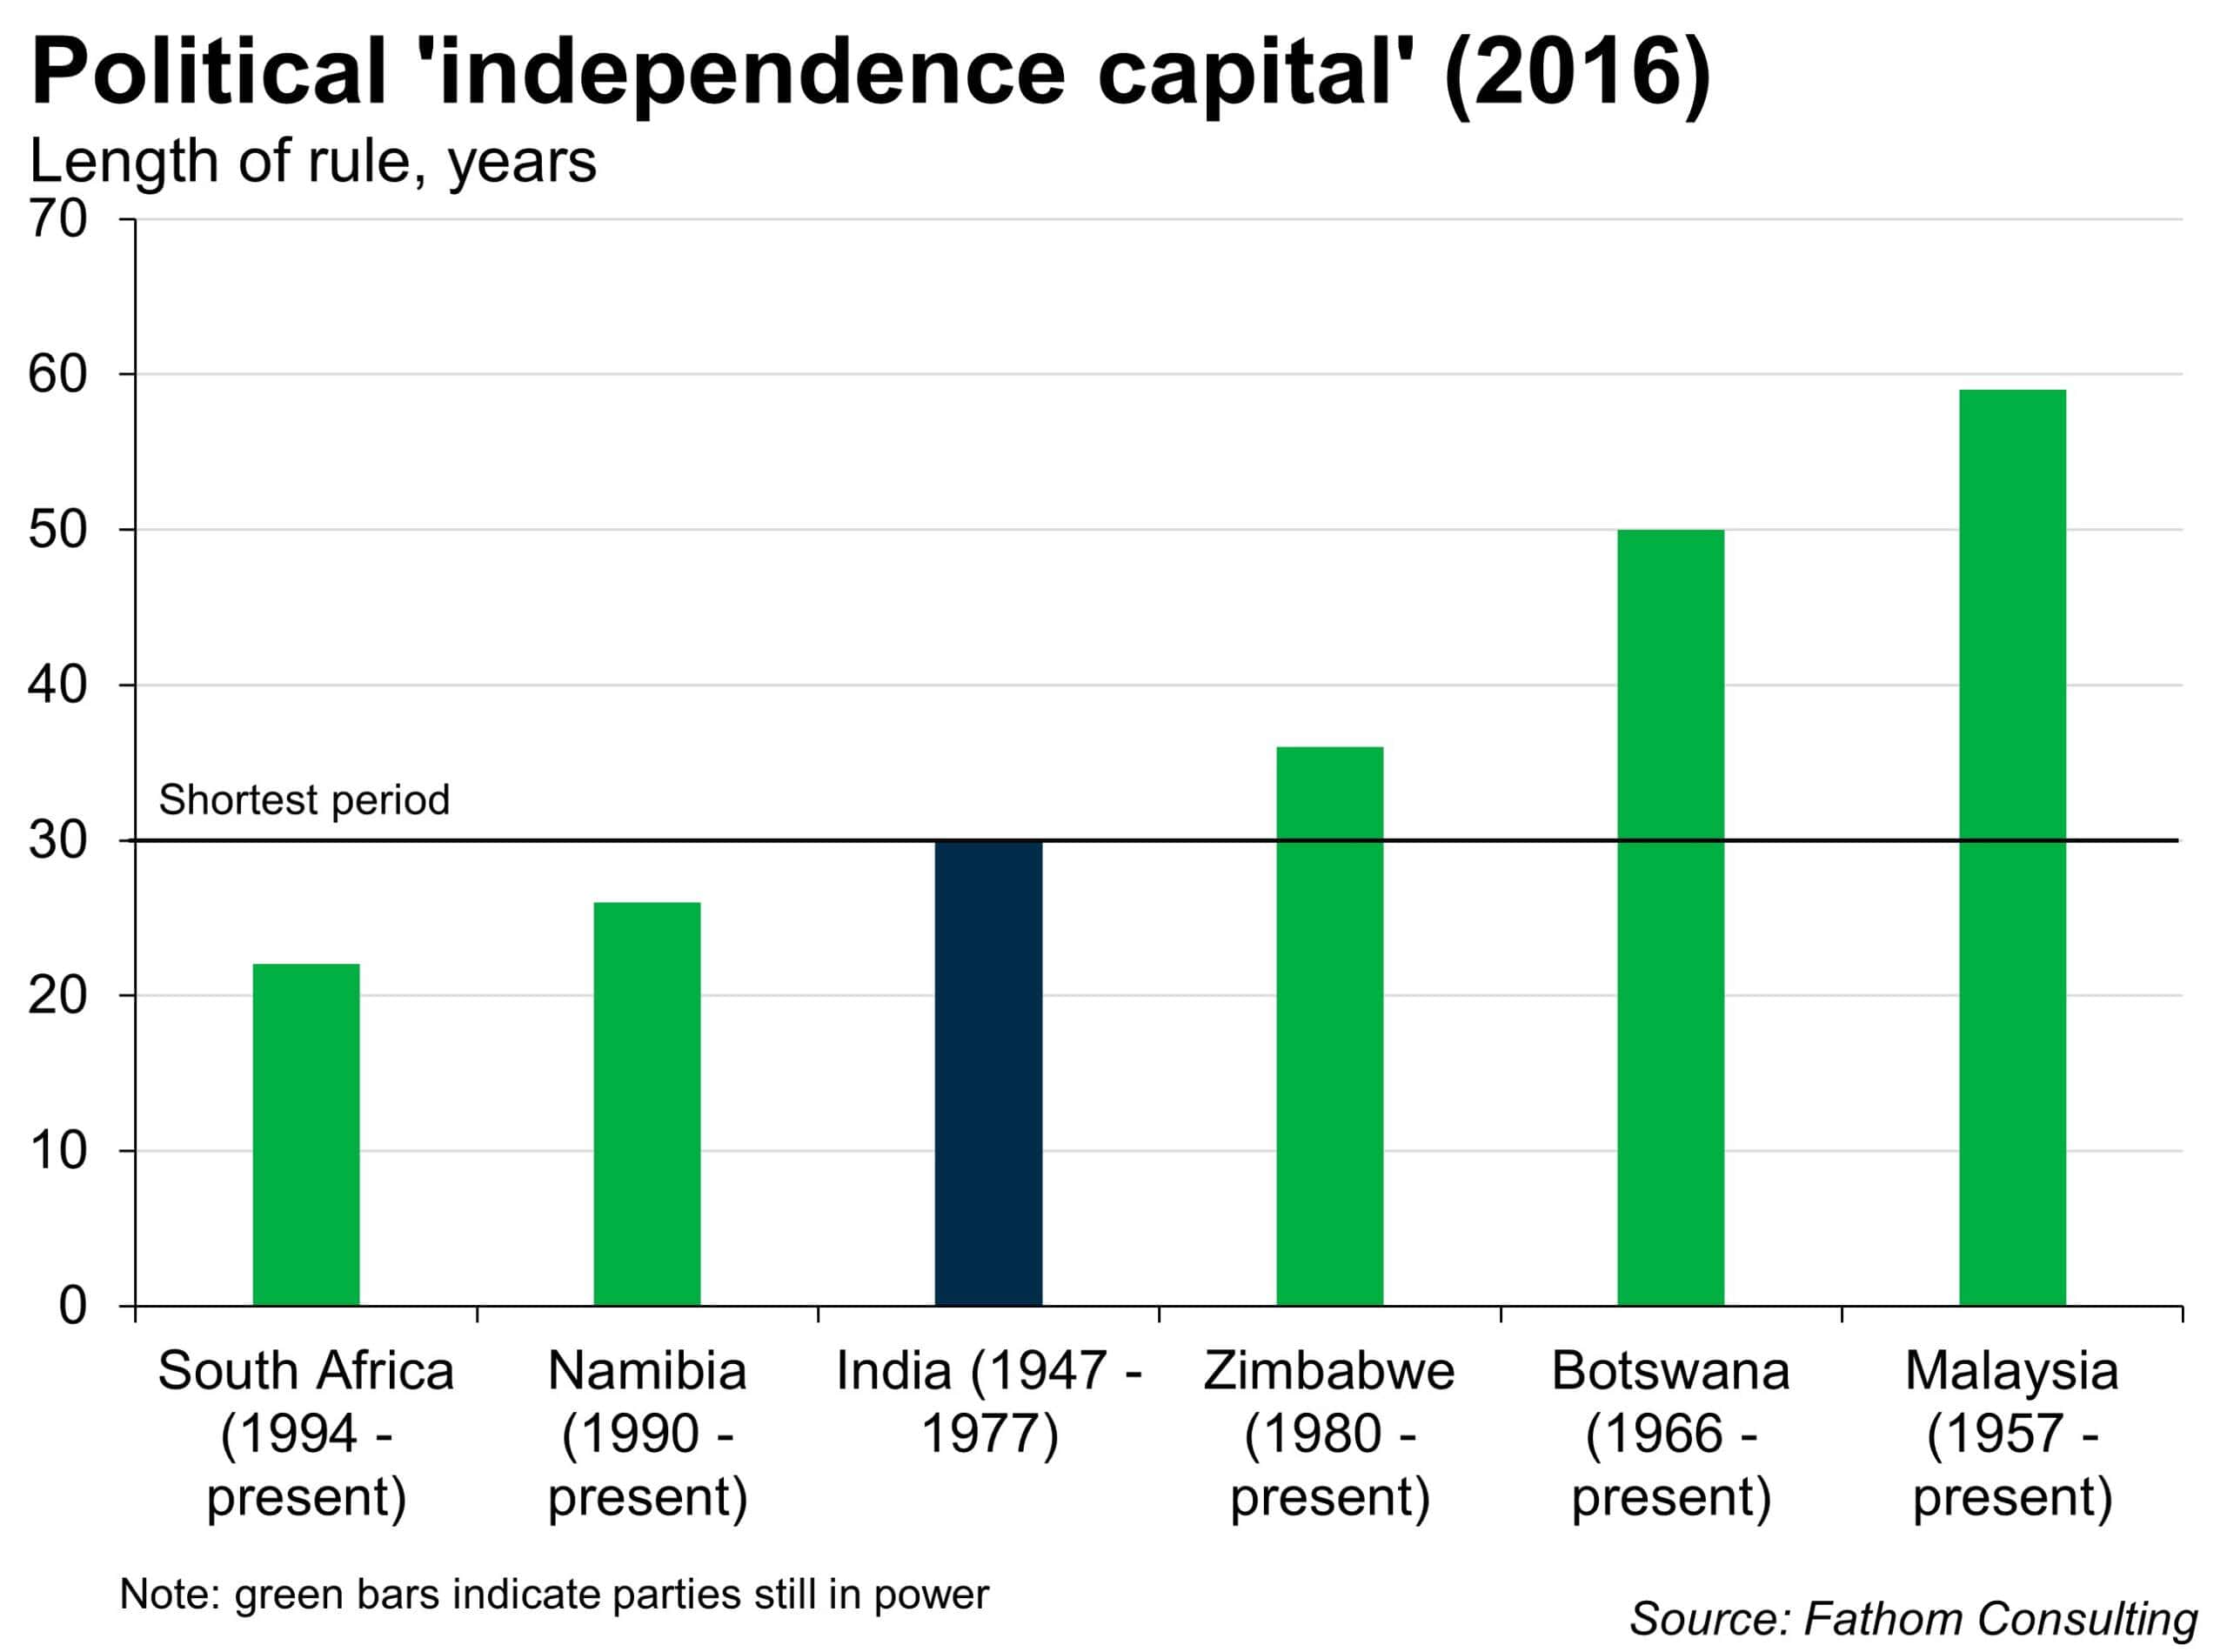 Political 'independence capital' in 2016, length or rule for South Africa, Nambia, India, Zimbabwe, Botswana, Malaysia.